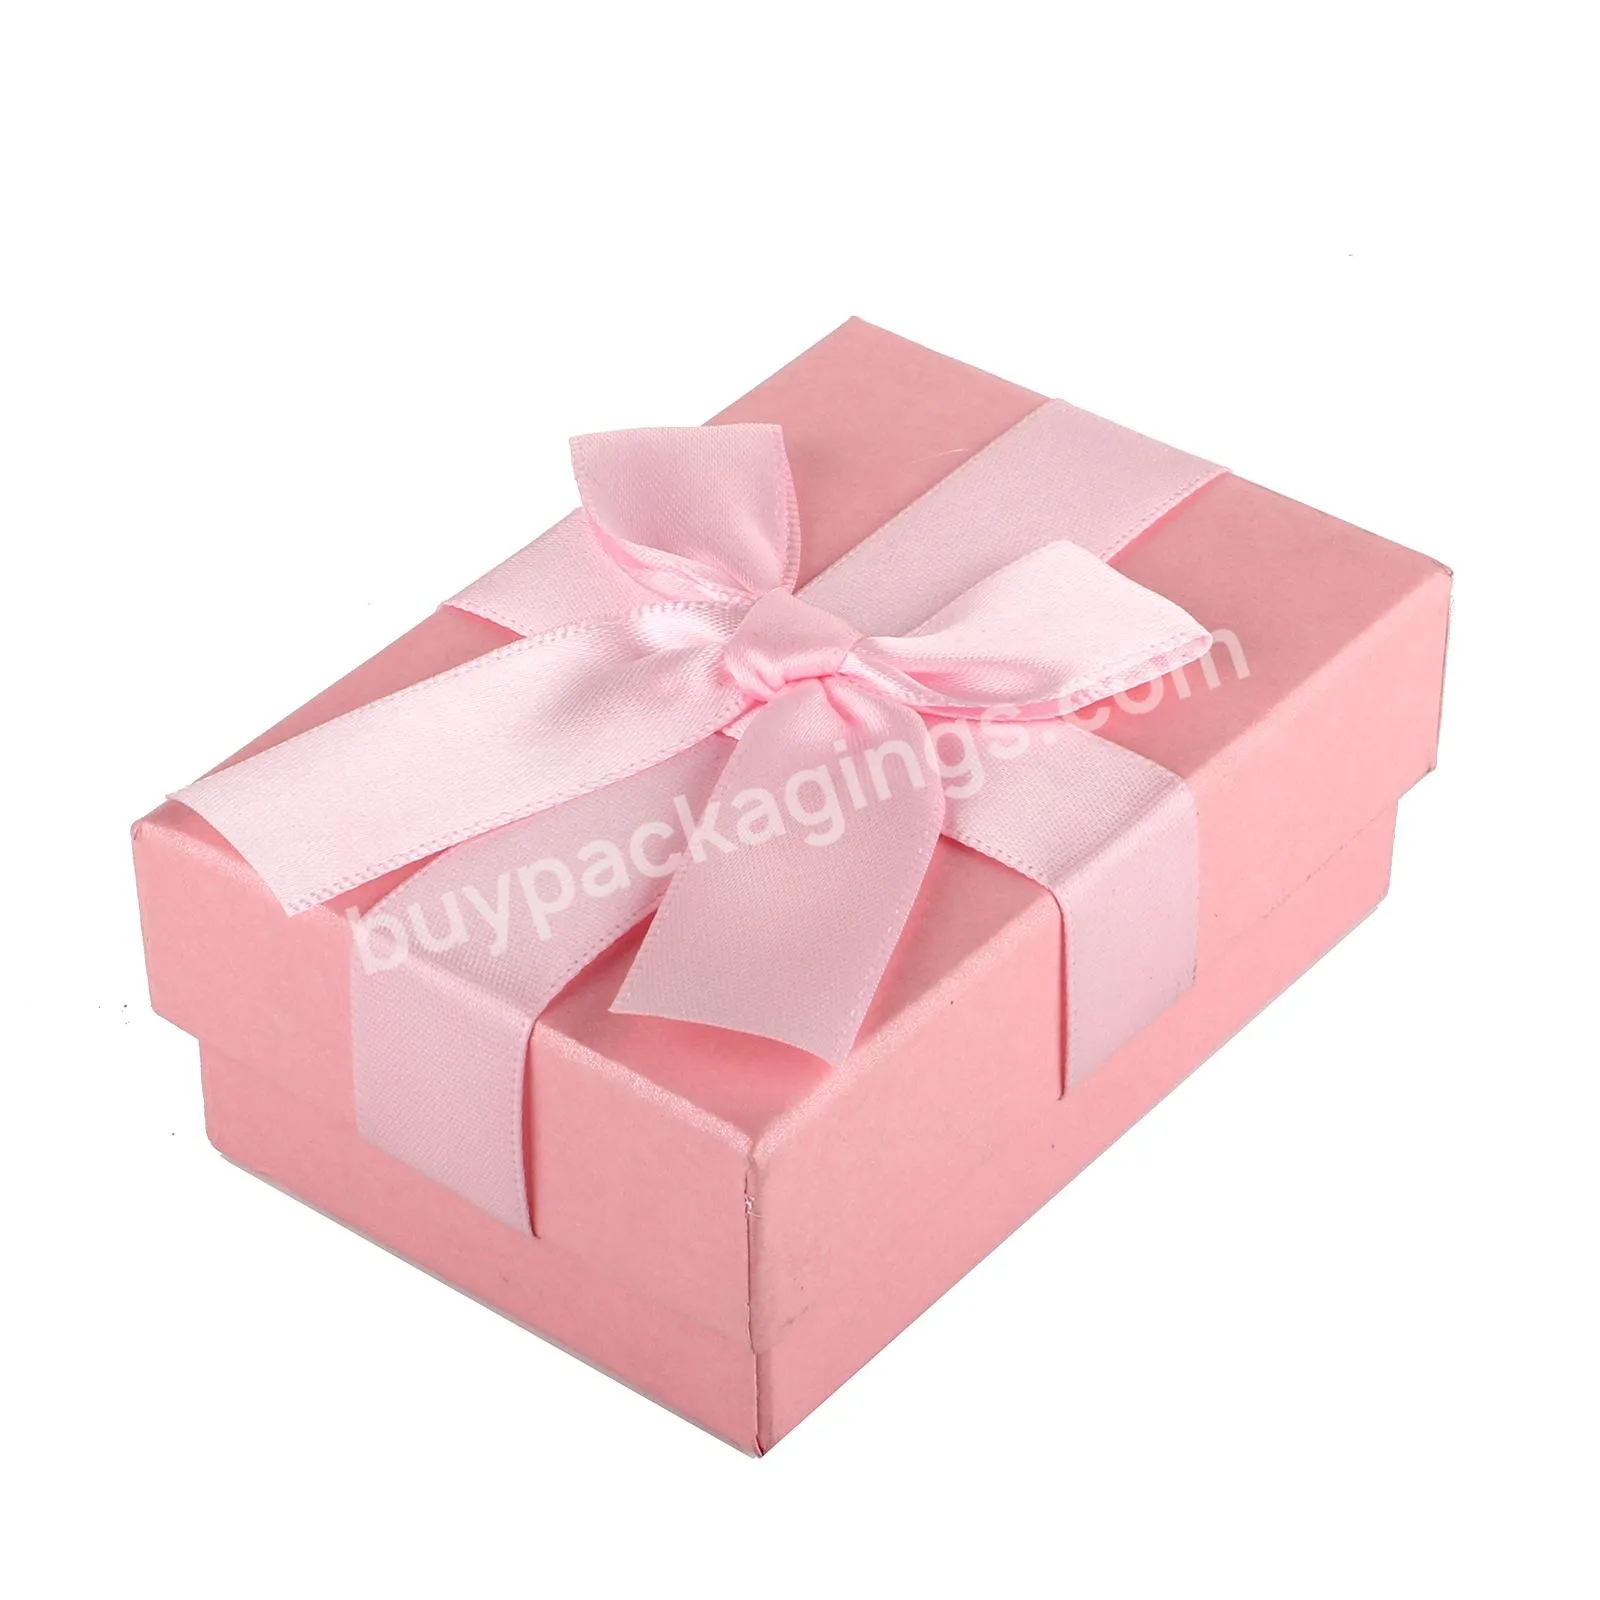 Customized High Quality Hot-selling Gridding Cute Gift Packaging Box With Ribbon